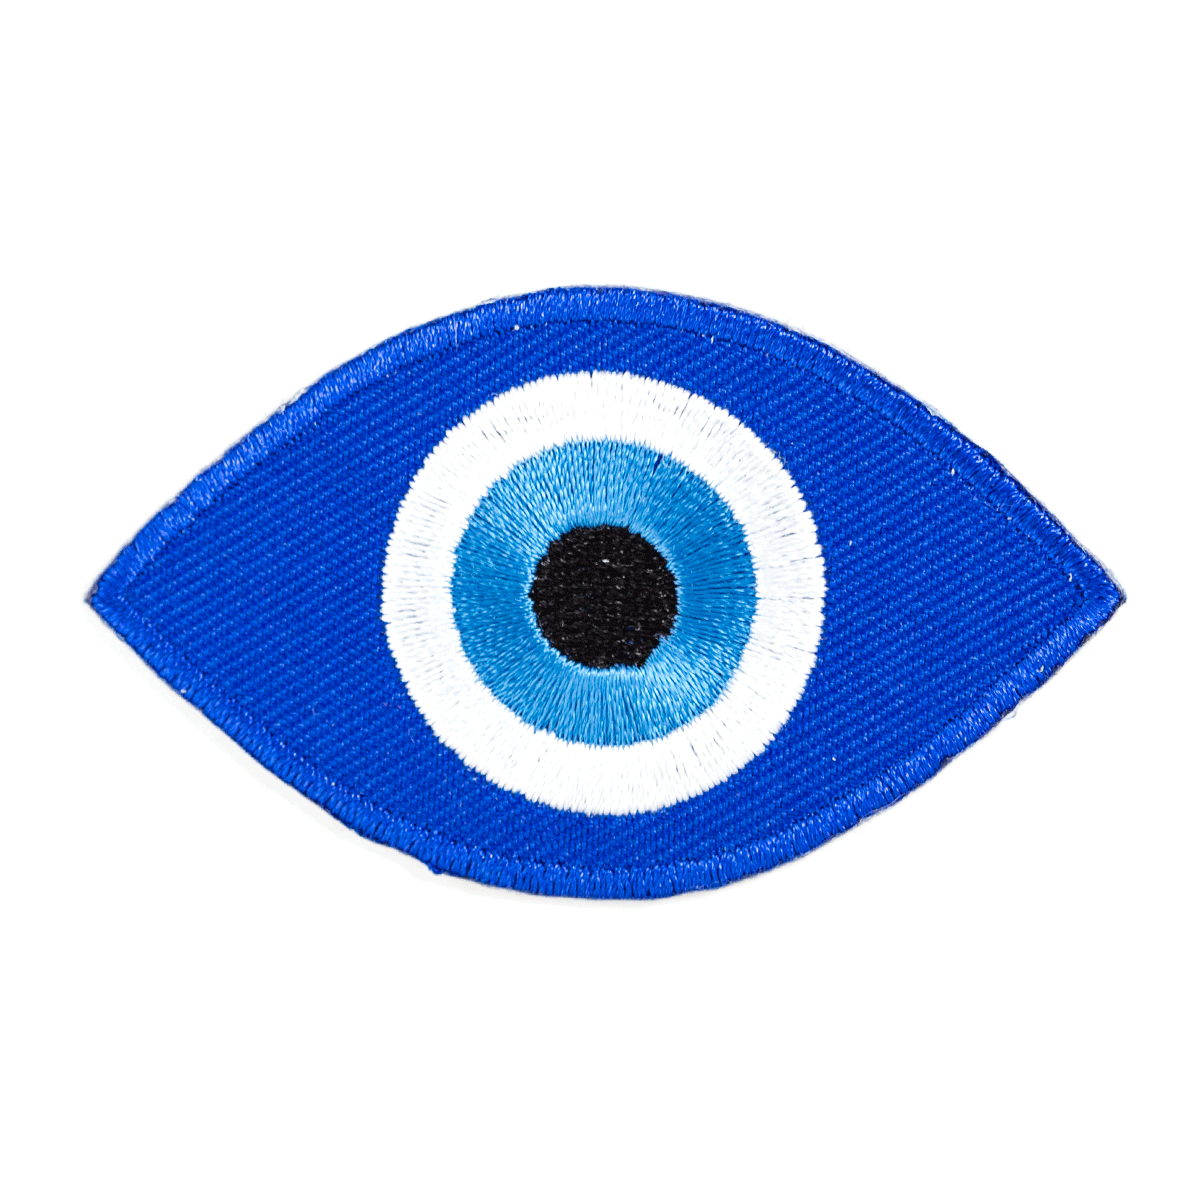  Hand of Evil Eye Patch for Adults - Embroidery Patch